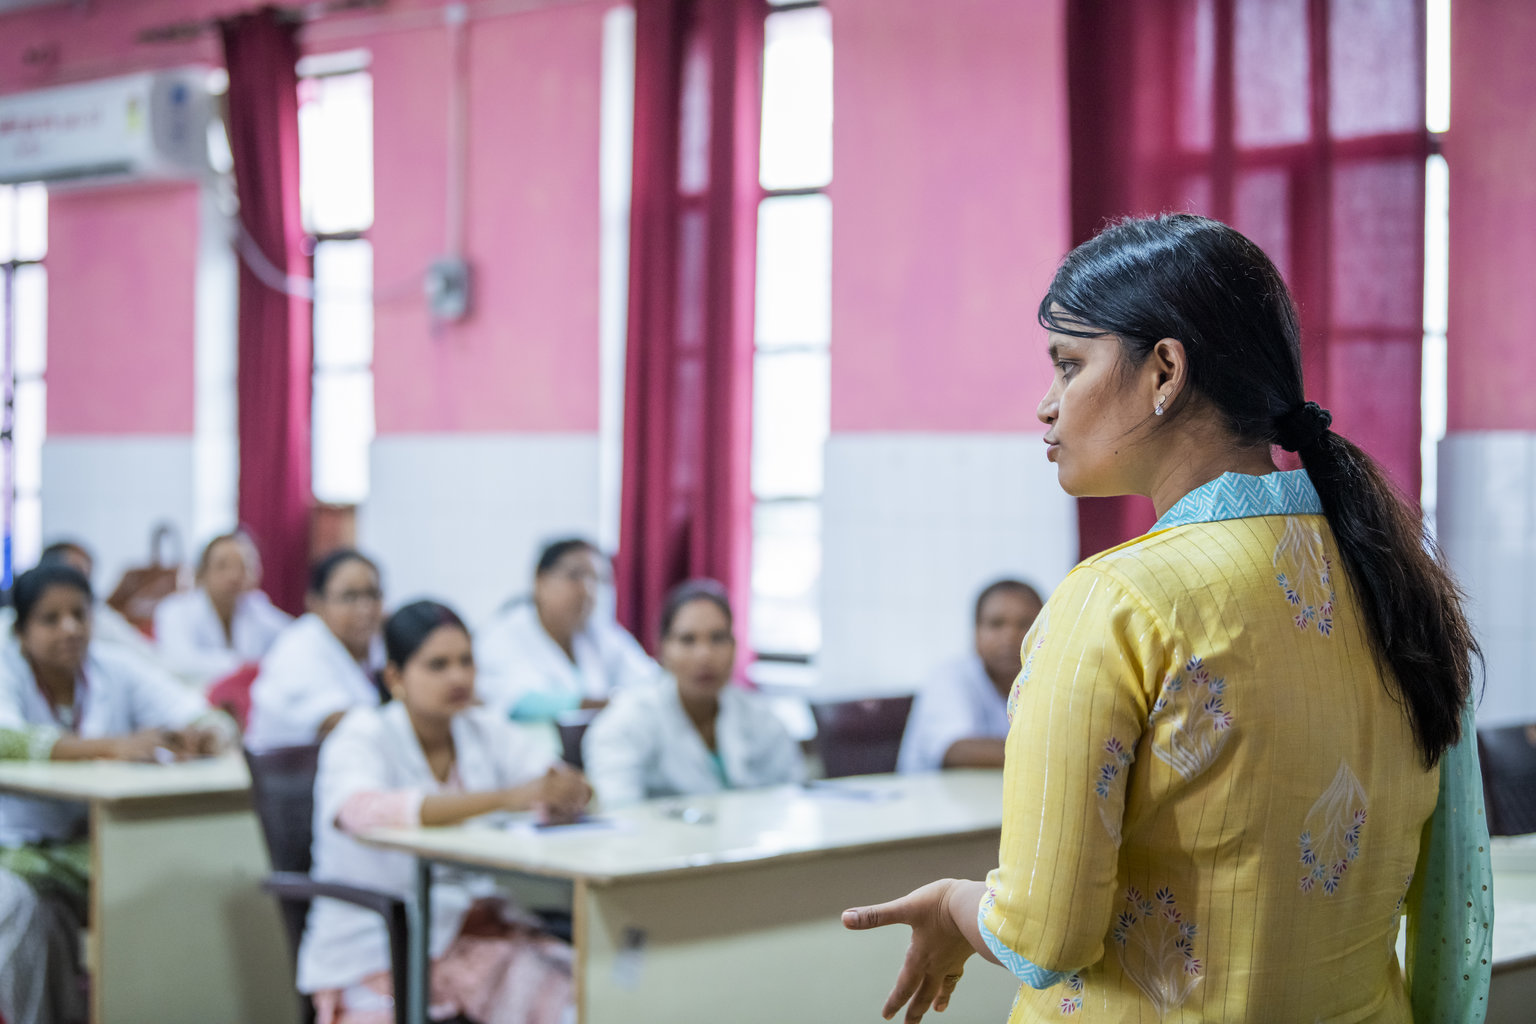 A doctor presents to a group of health workers at a hospital in India